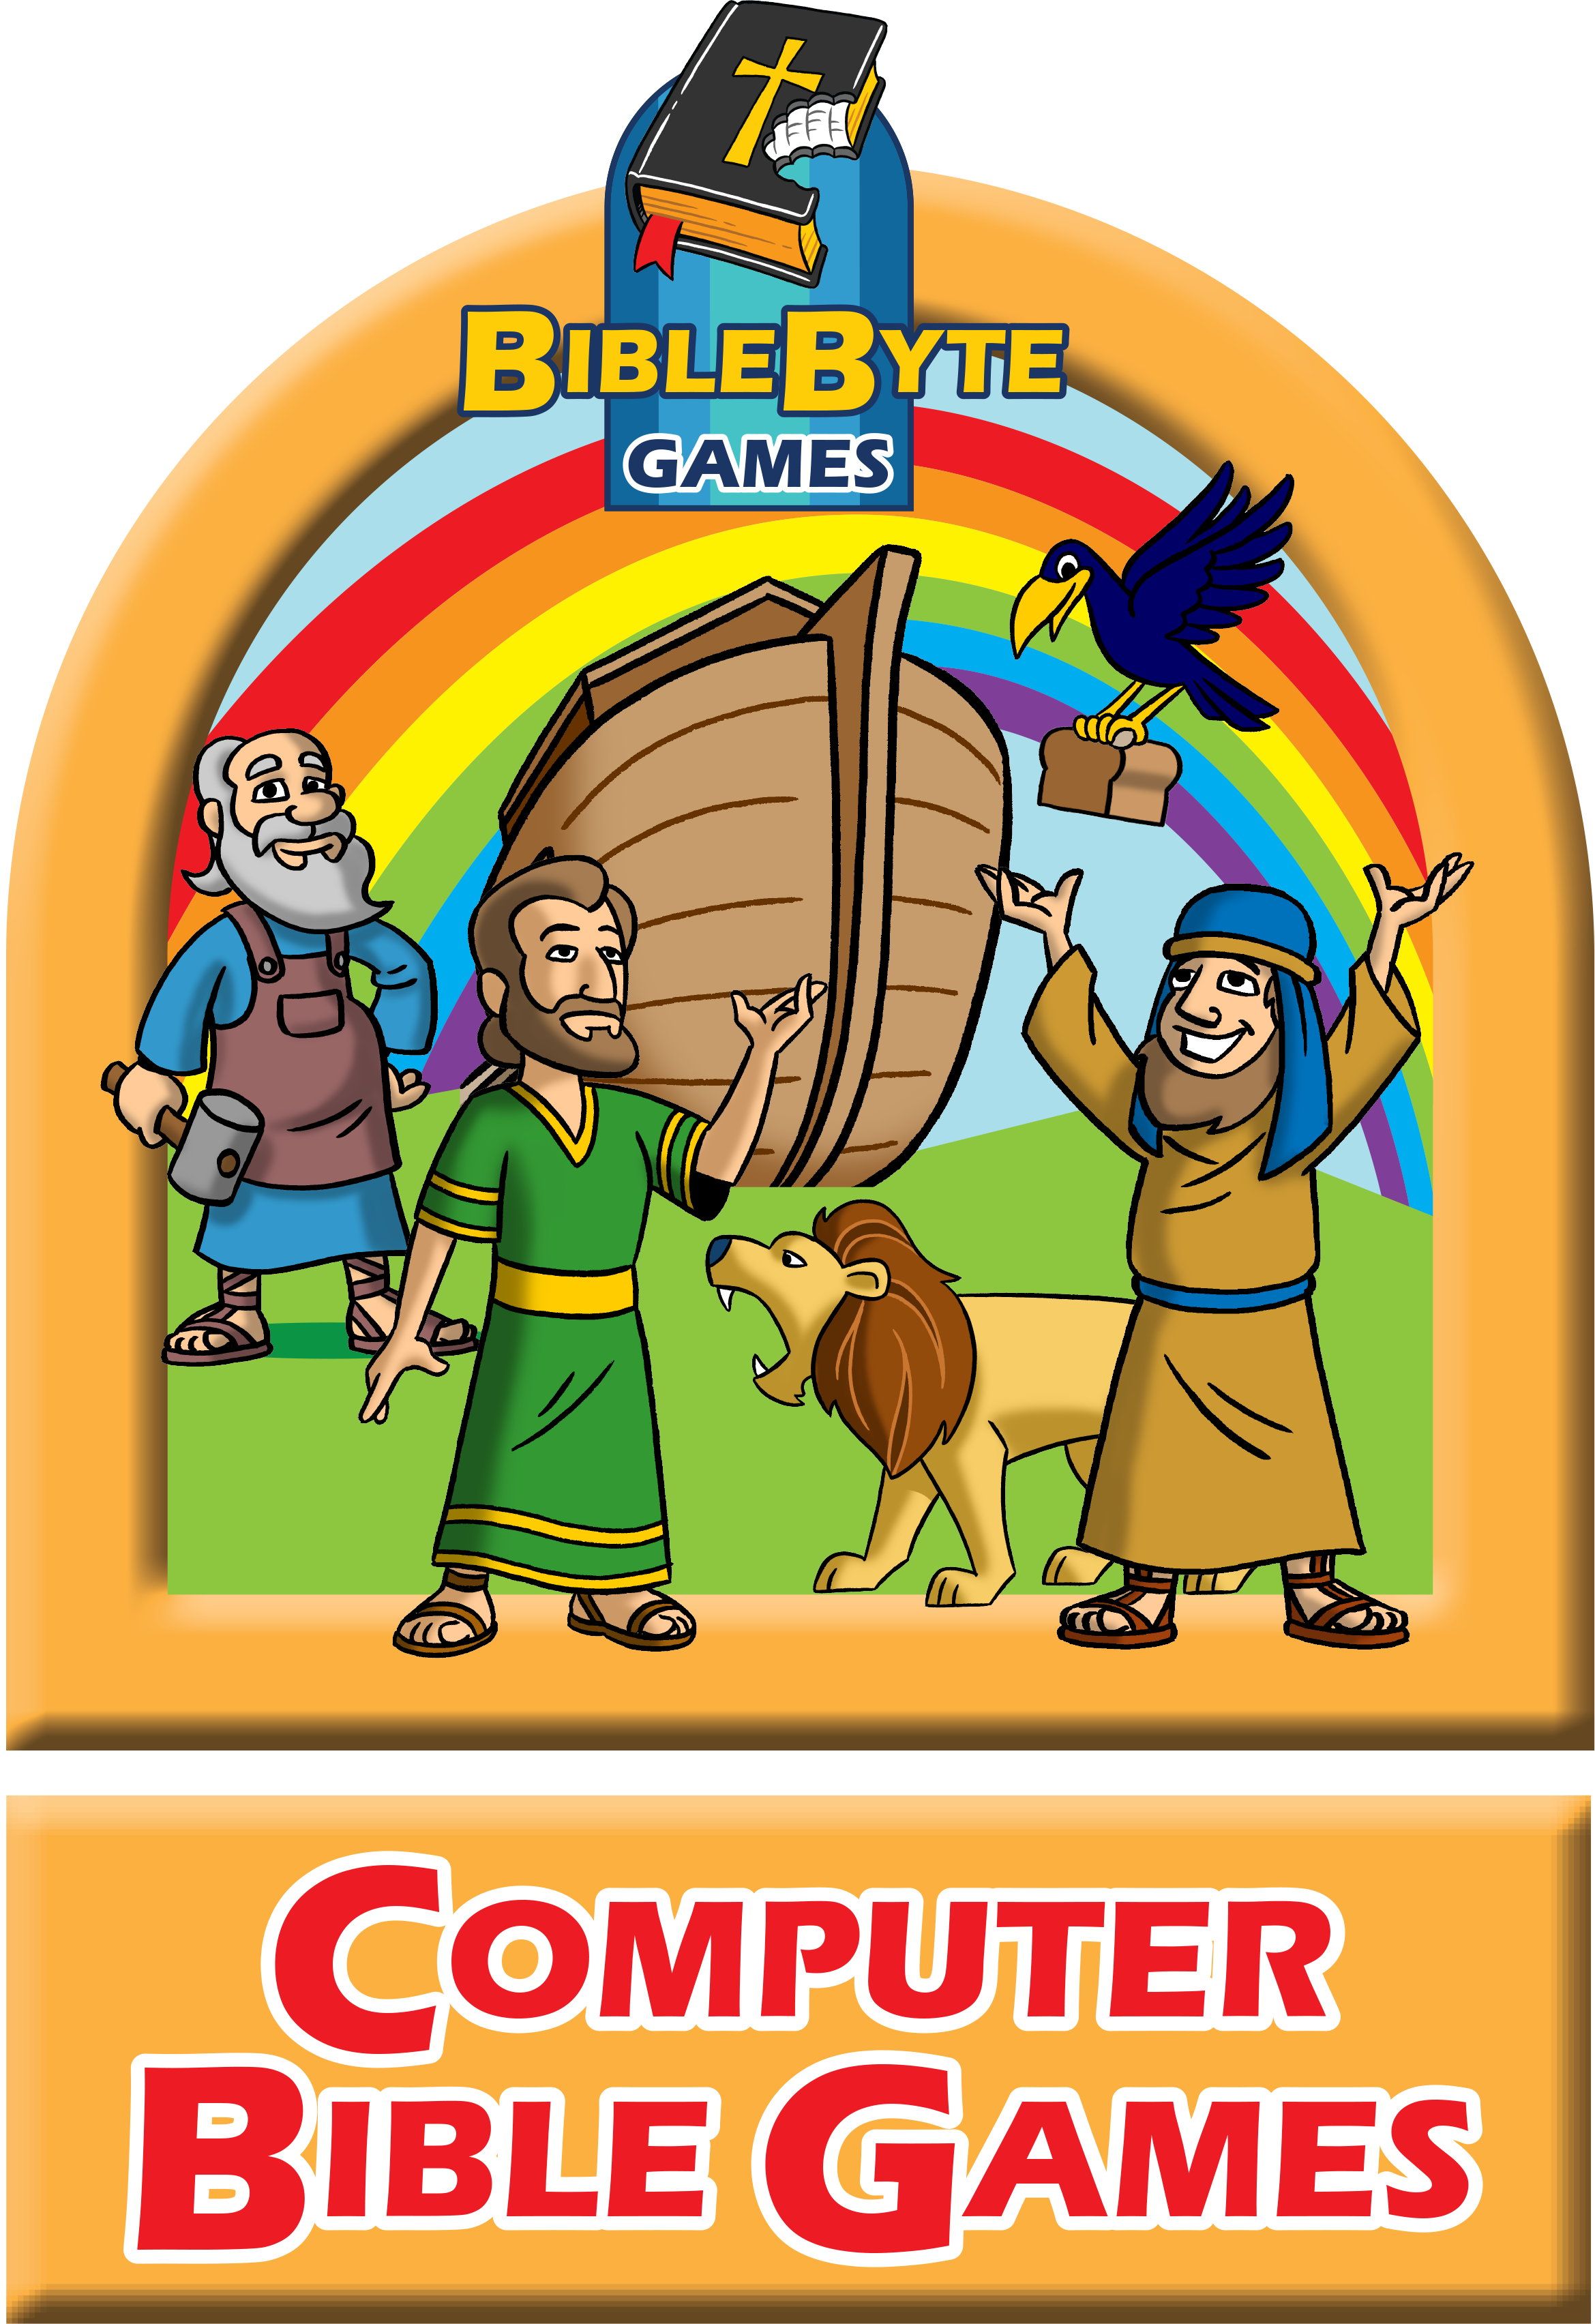 Computer Bible Games Series For Windows XP Officially Retired & Un-Supported!